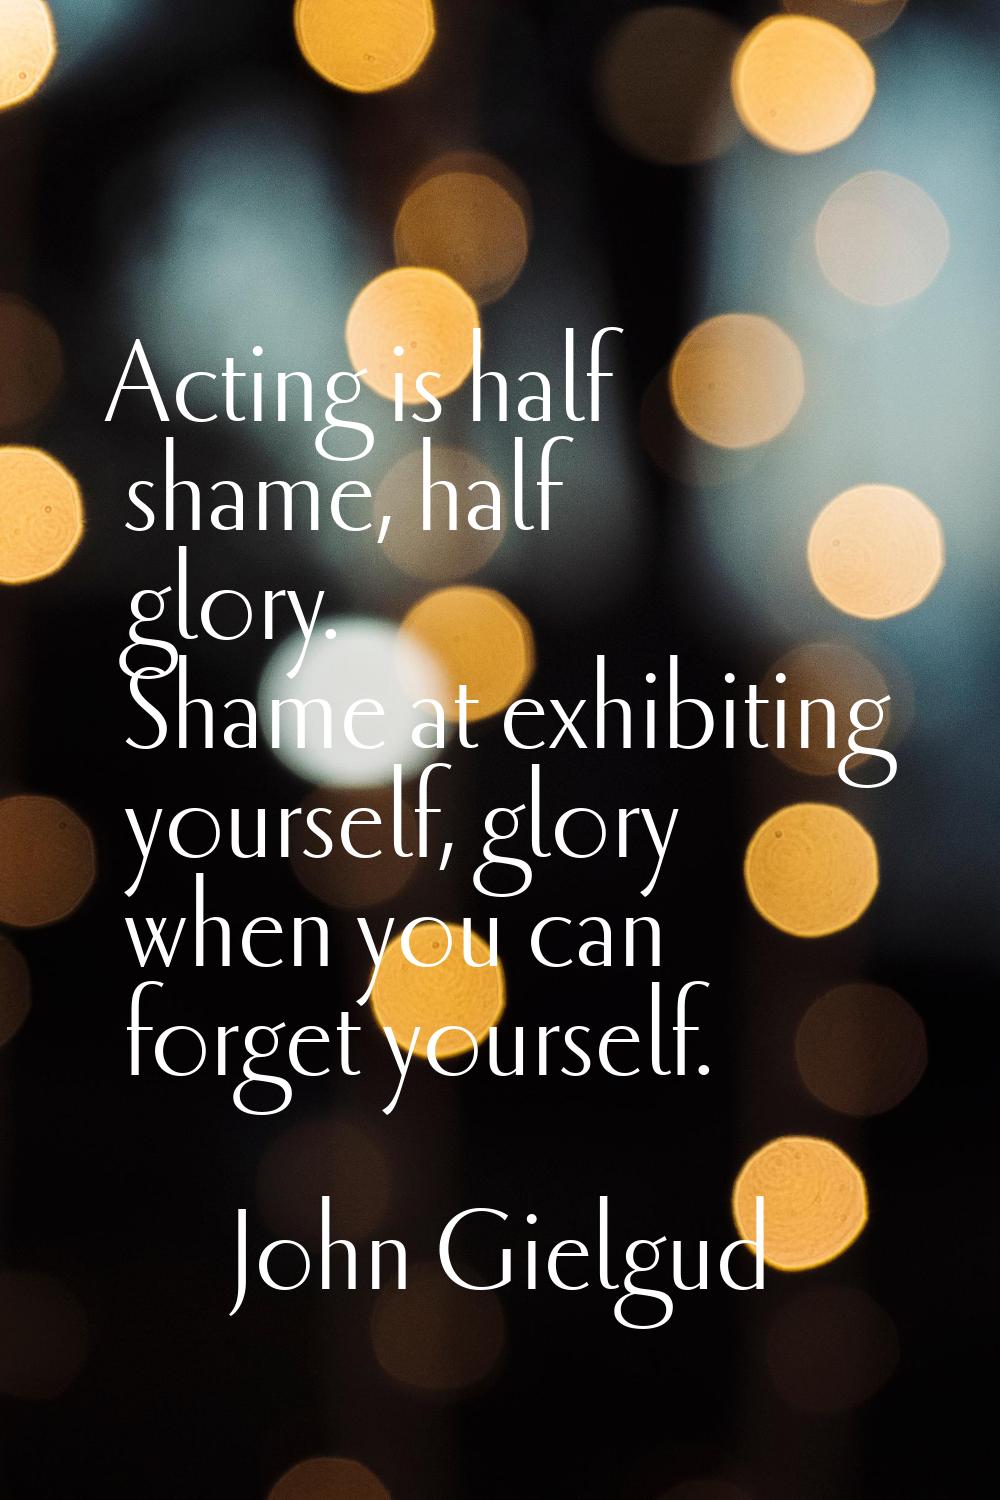 Acting is half shame, half glory. Shame at exhibiting yourself, glory when you can forget yourself.